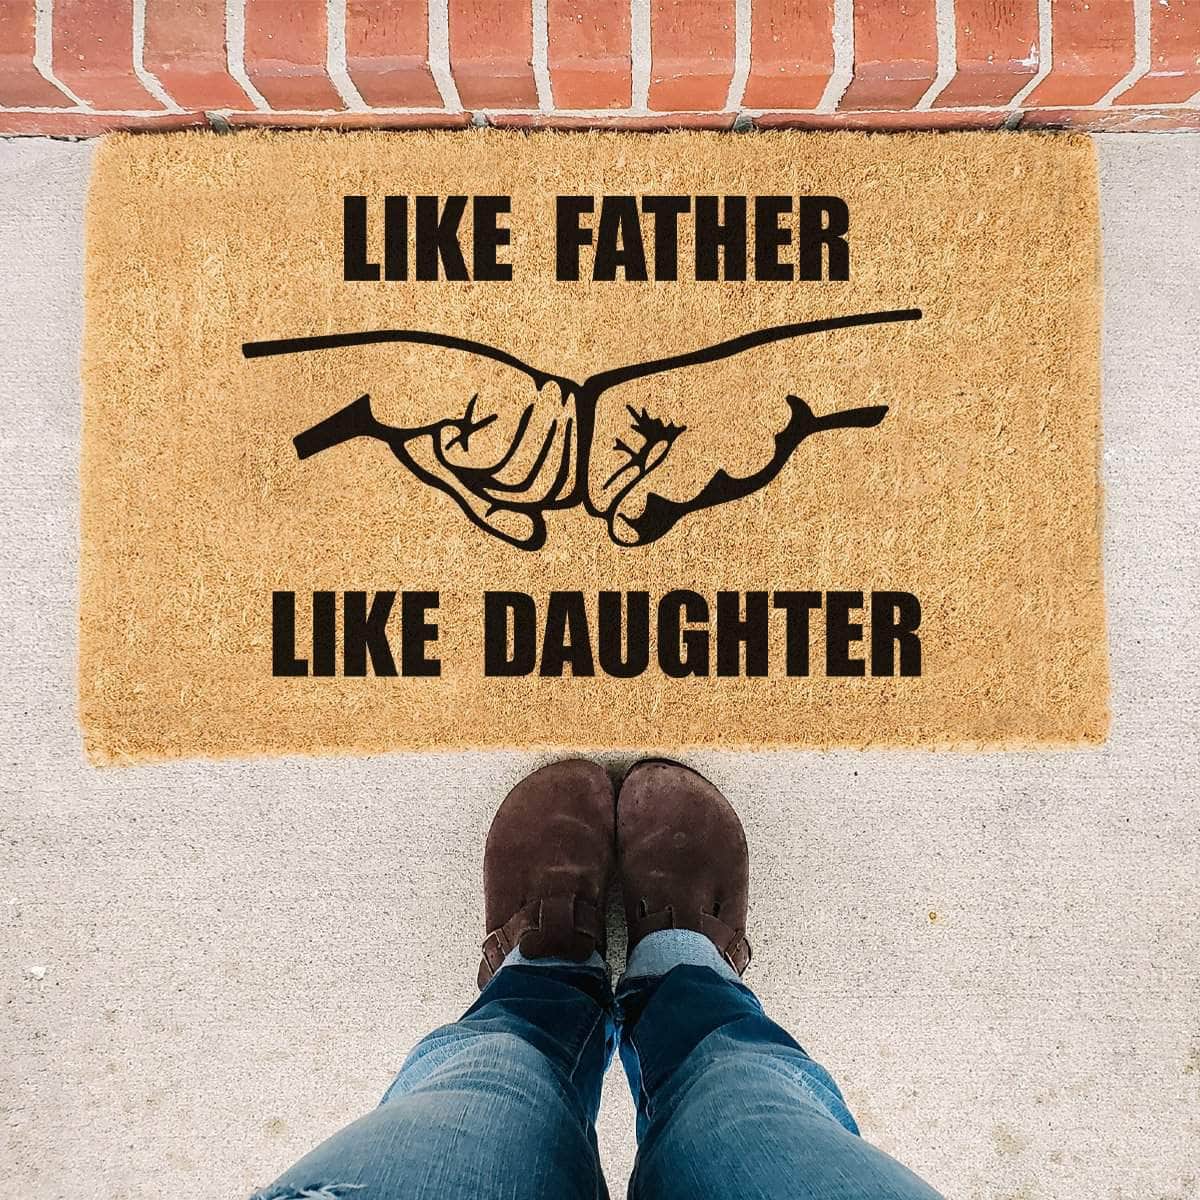 Like Father Like Daughter - Doormat